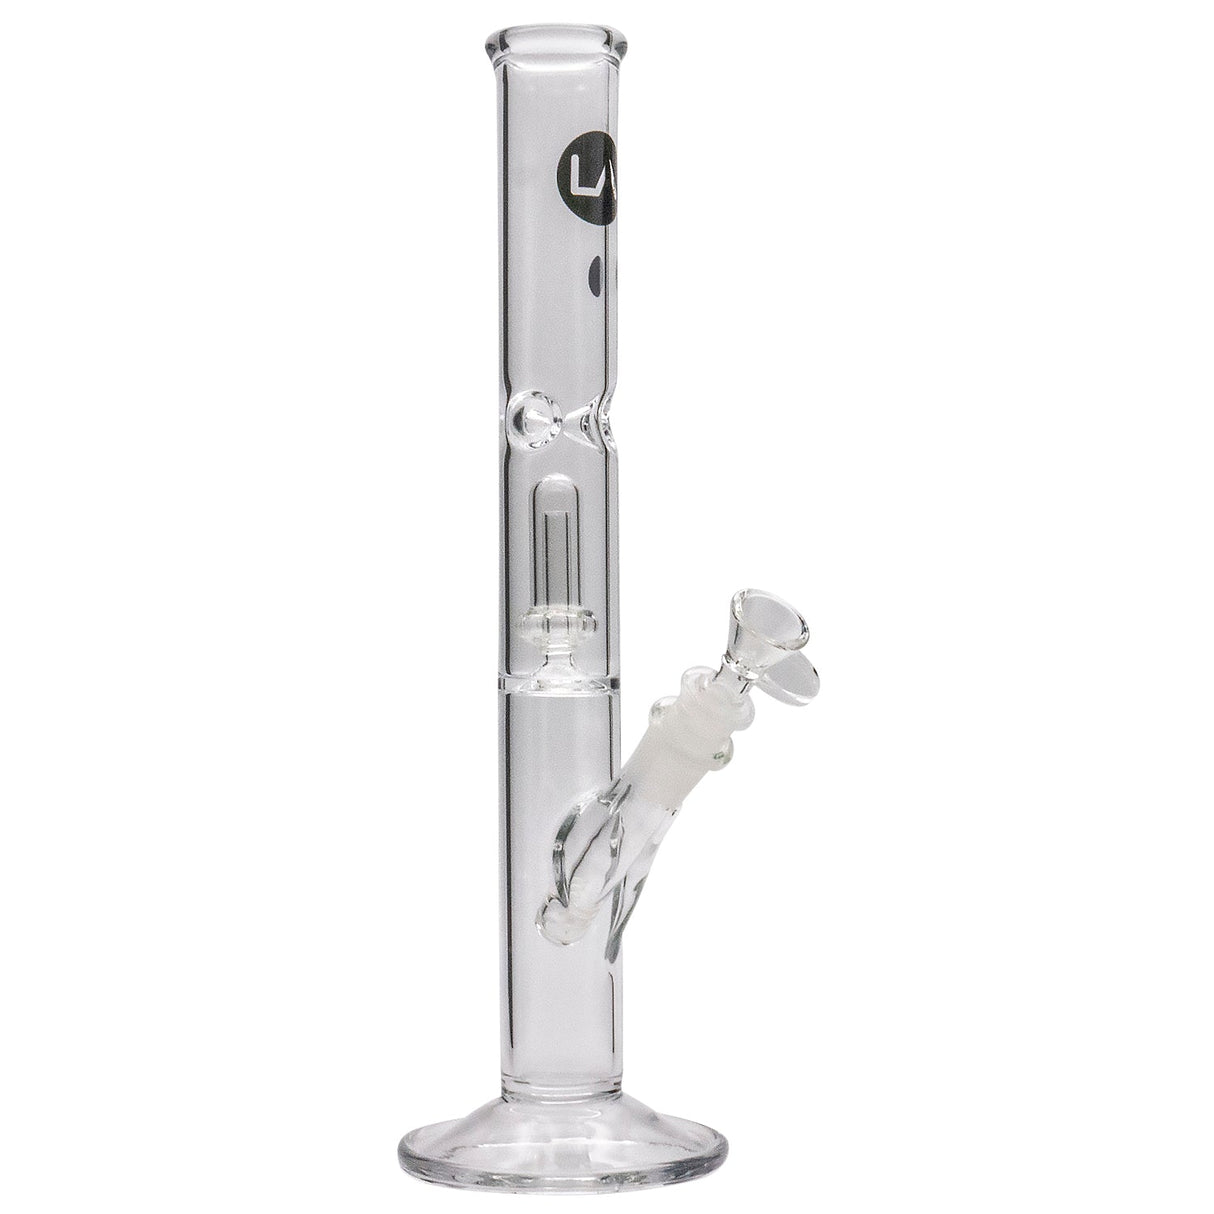 LA Pipes Straight Bong with Single Showerhead Perc, Clear Borosilicate Glass, Front View